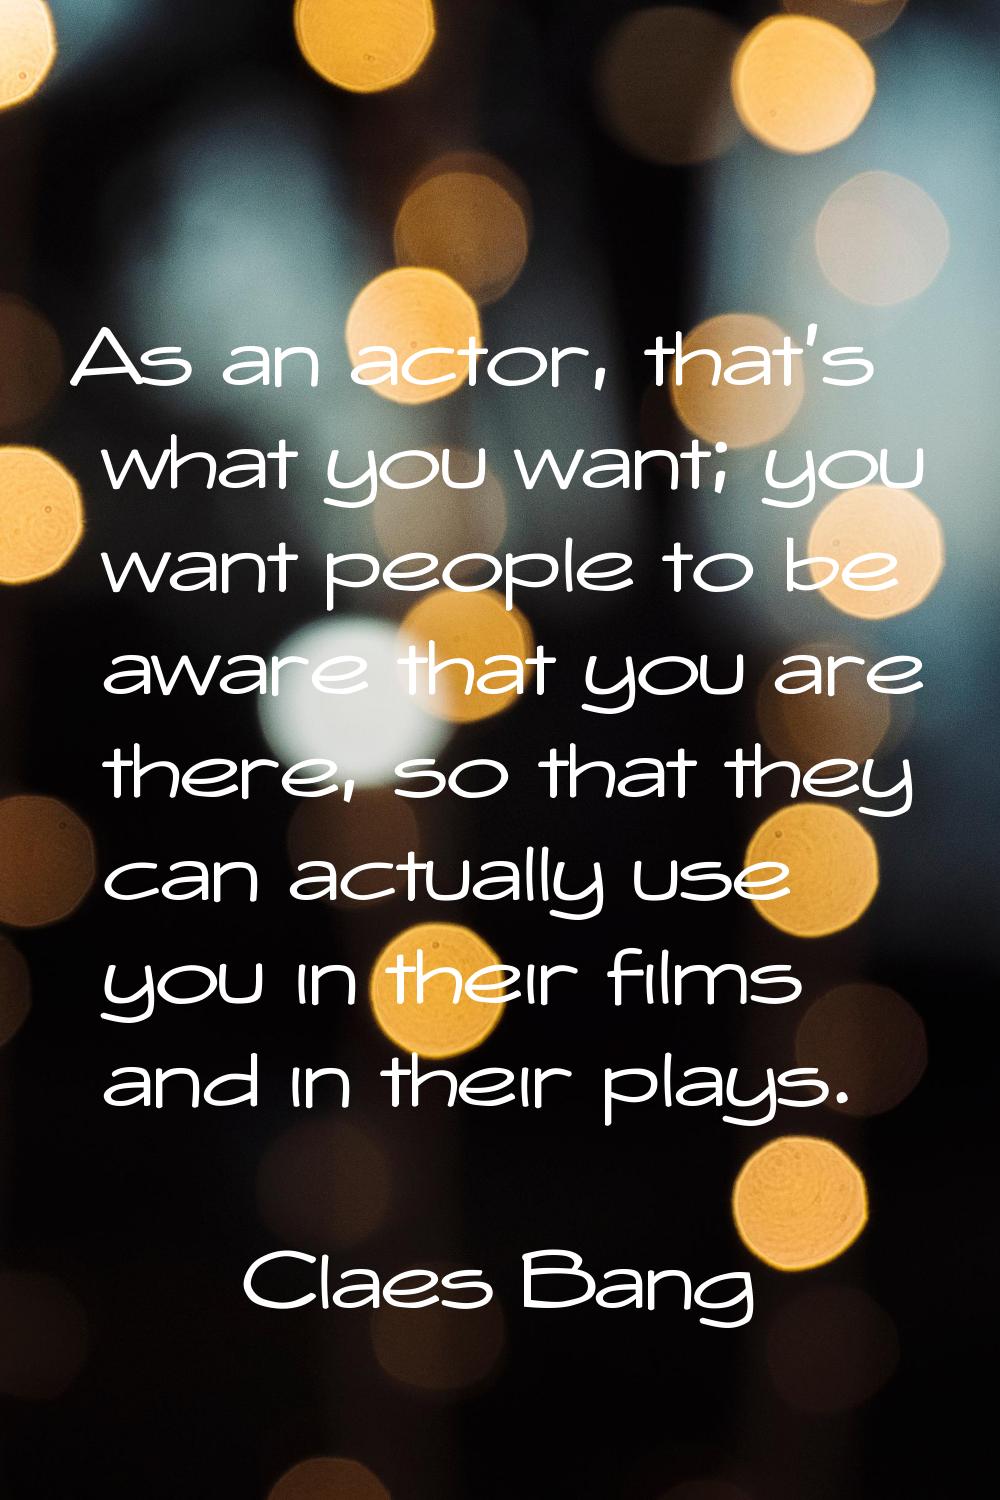 As an actor, that's what you want; you want people to be aware that you are there, so that they can